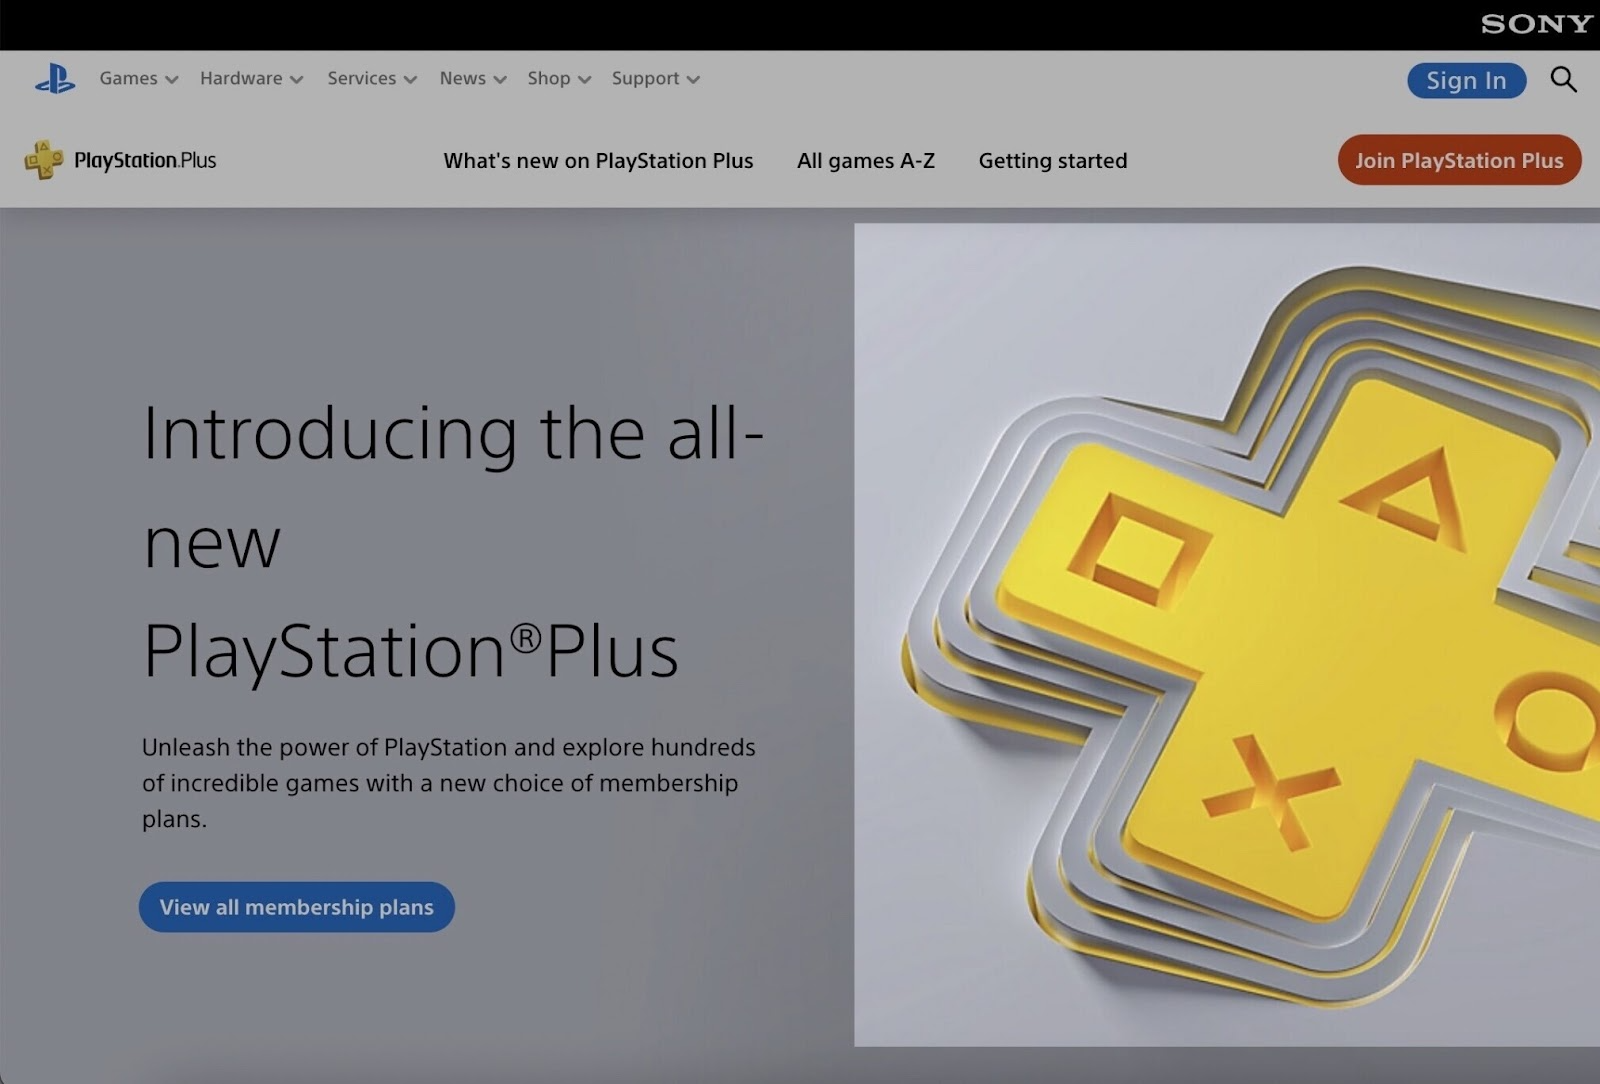 PlayStation's landing page with a big yellow d-pad